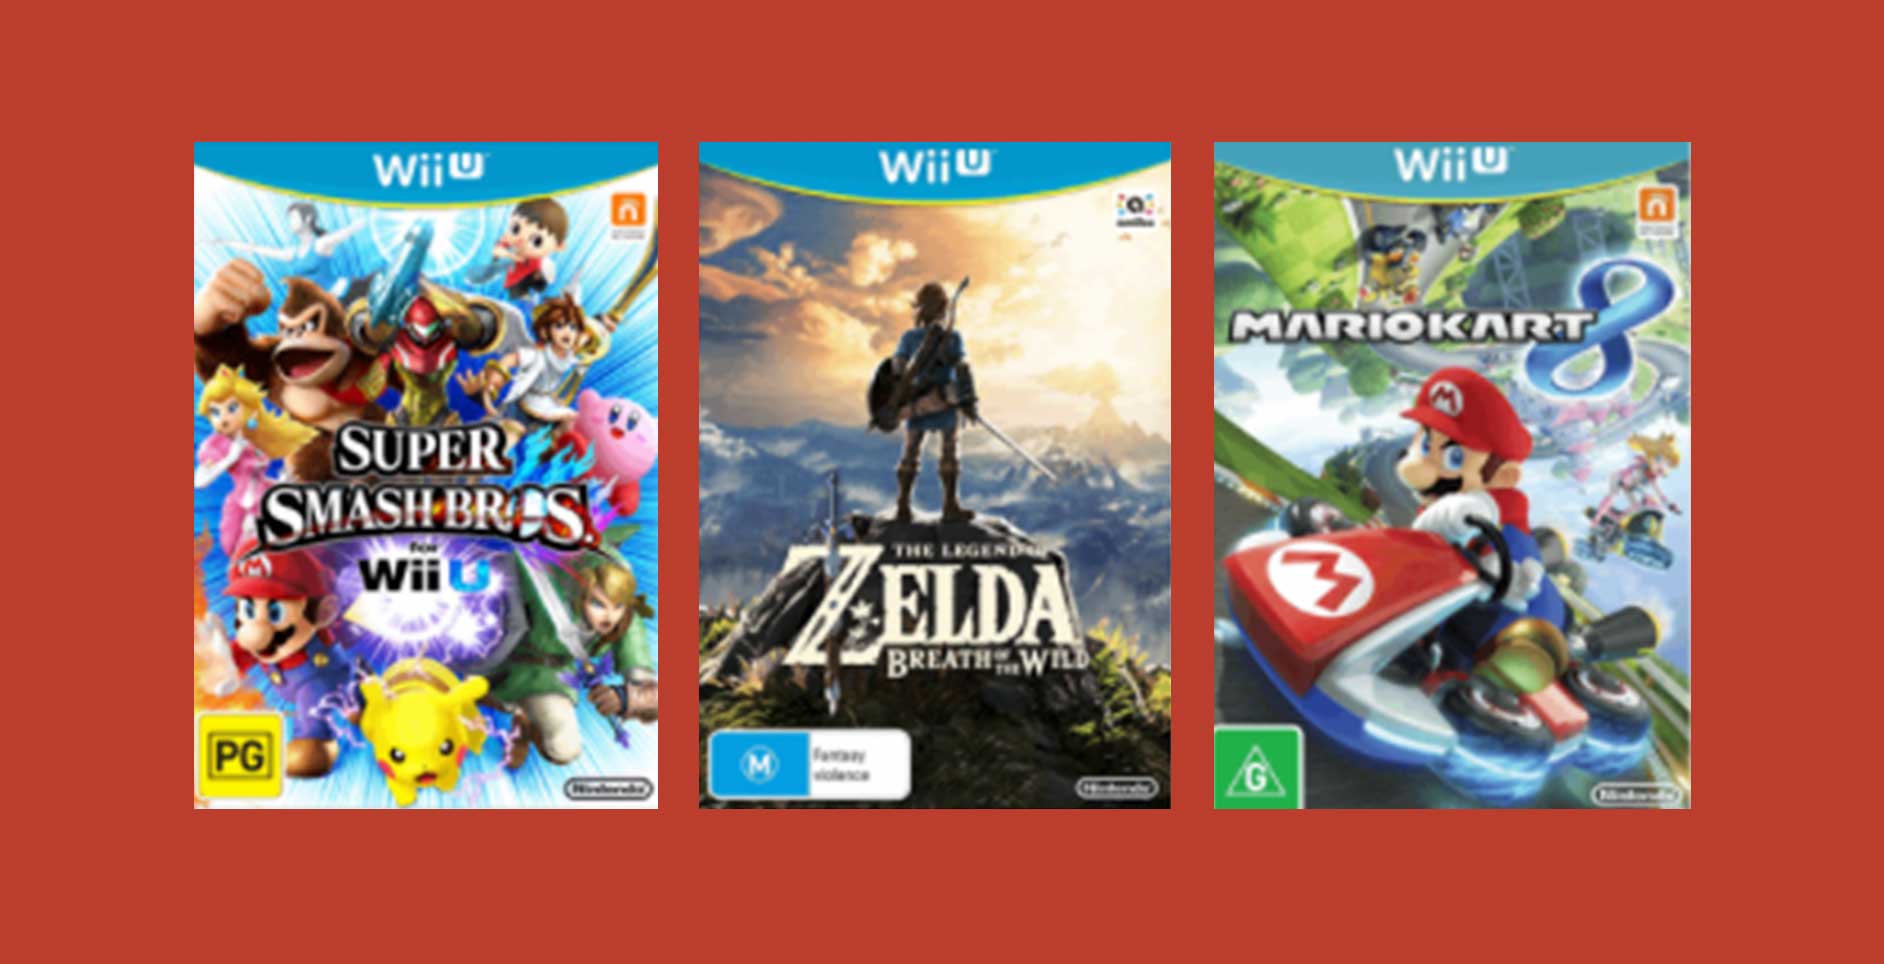 Target Is Wii Games For $5 Each